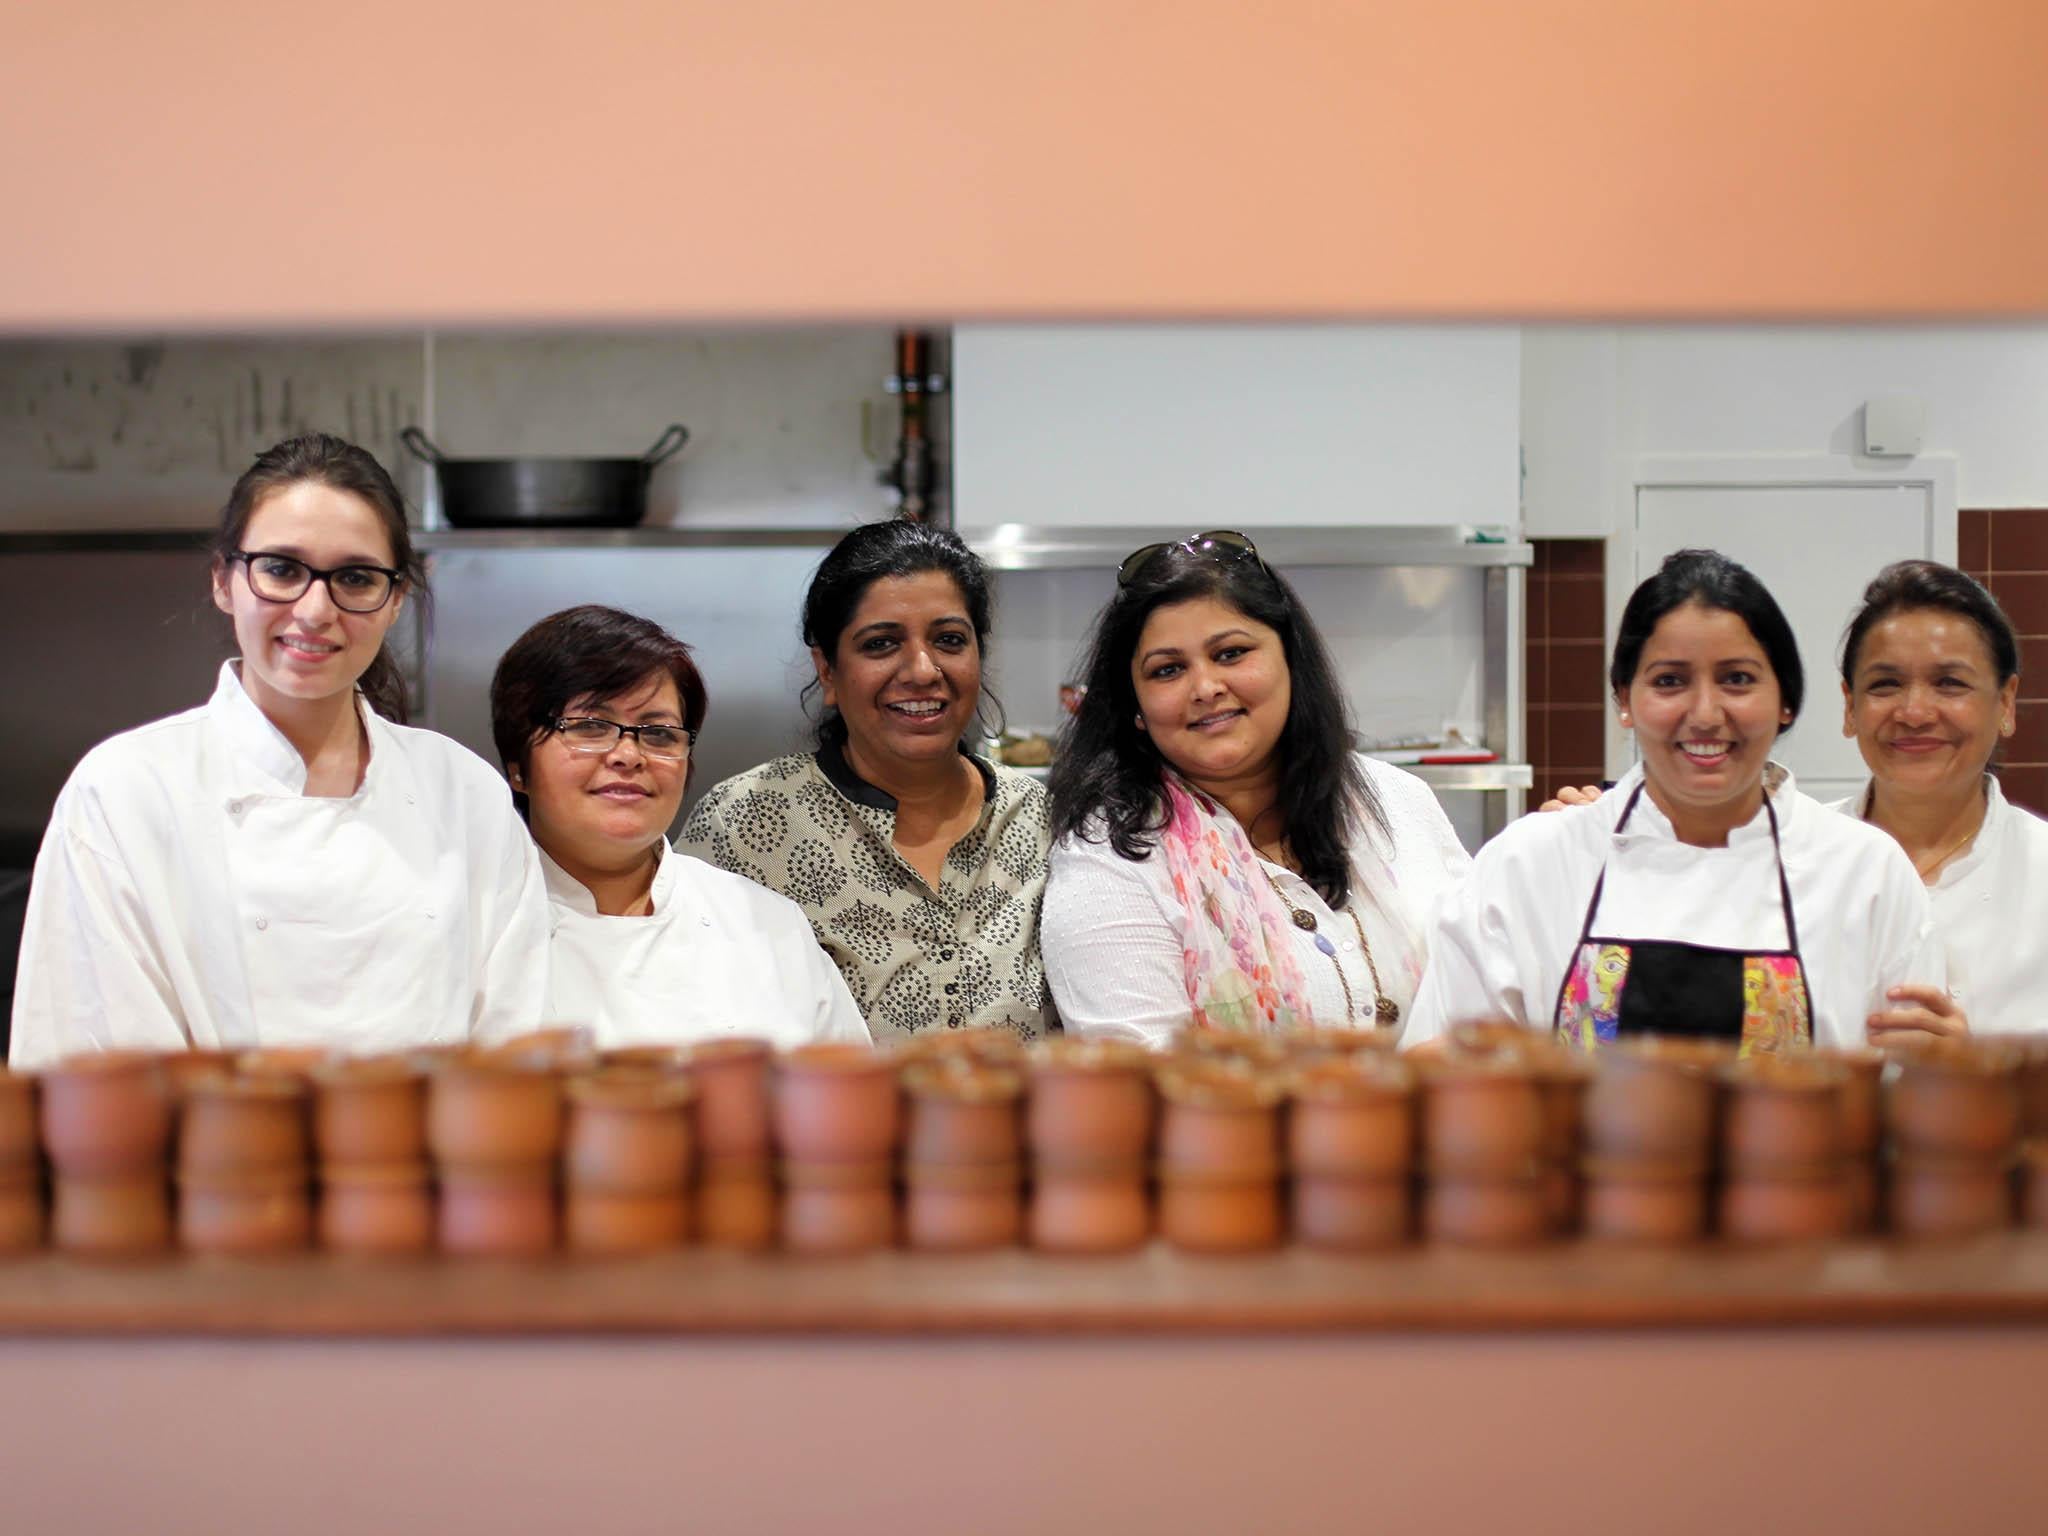 Running a kitchen entirely made of south Asian non-professionally trained female chefs, Khan is hoping to inspire other restaurants to be more open too